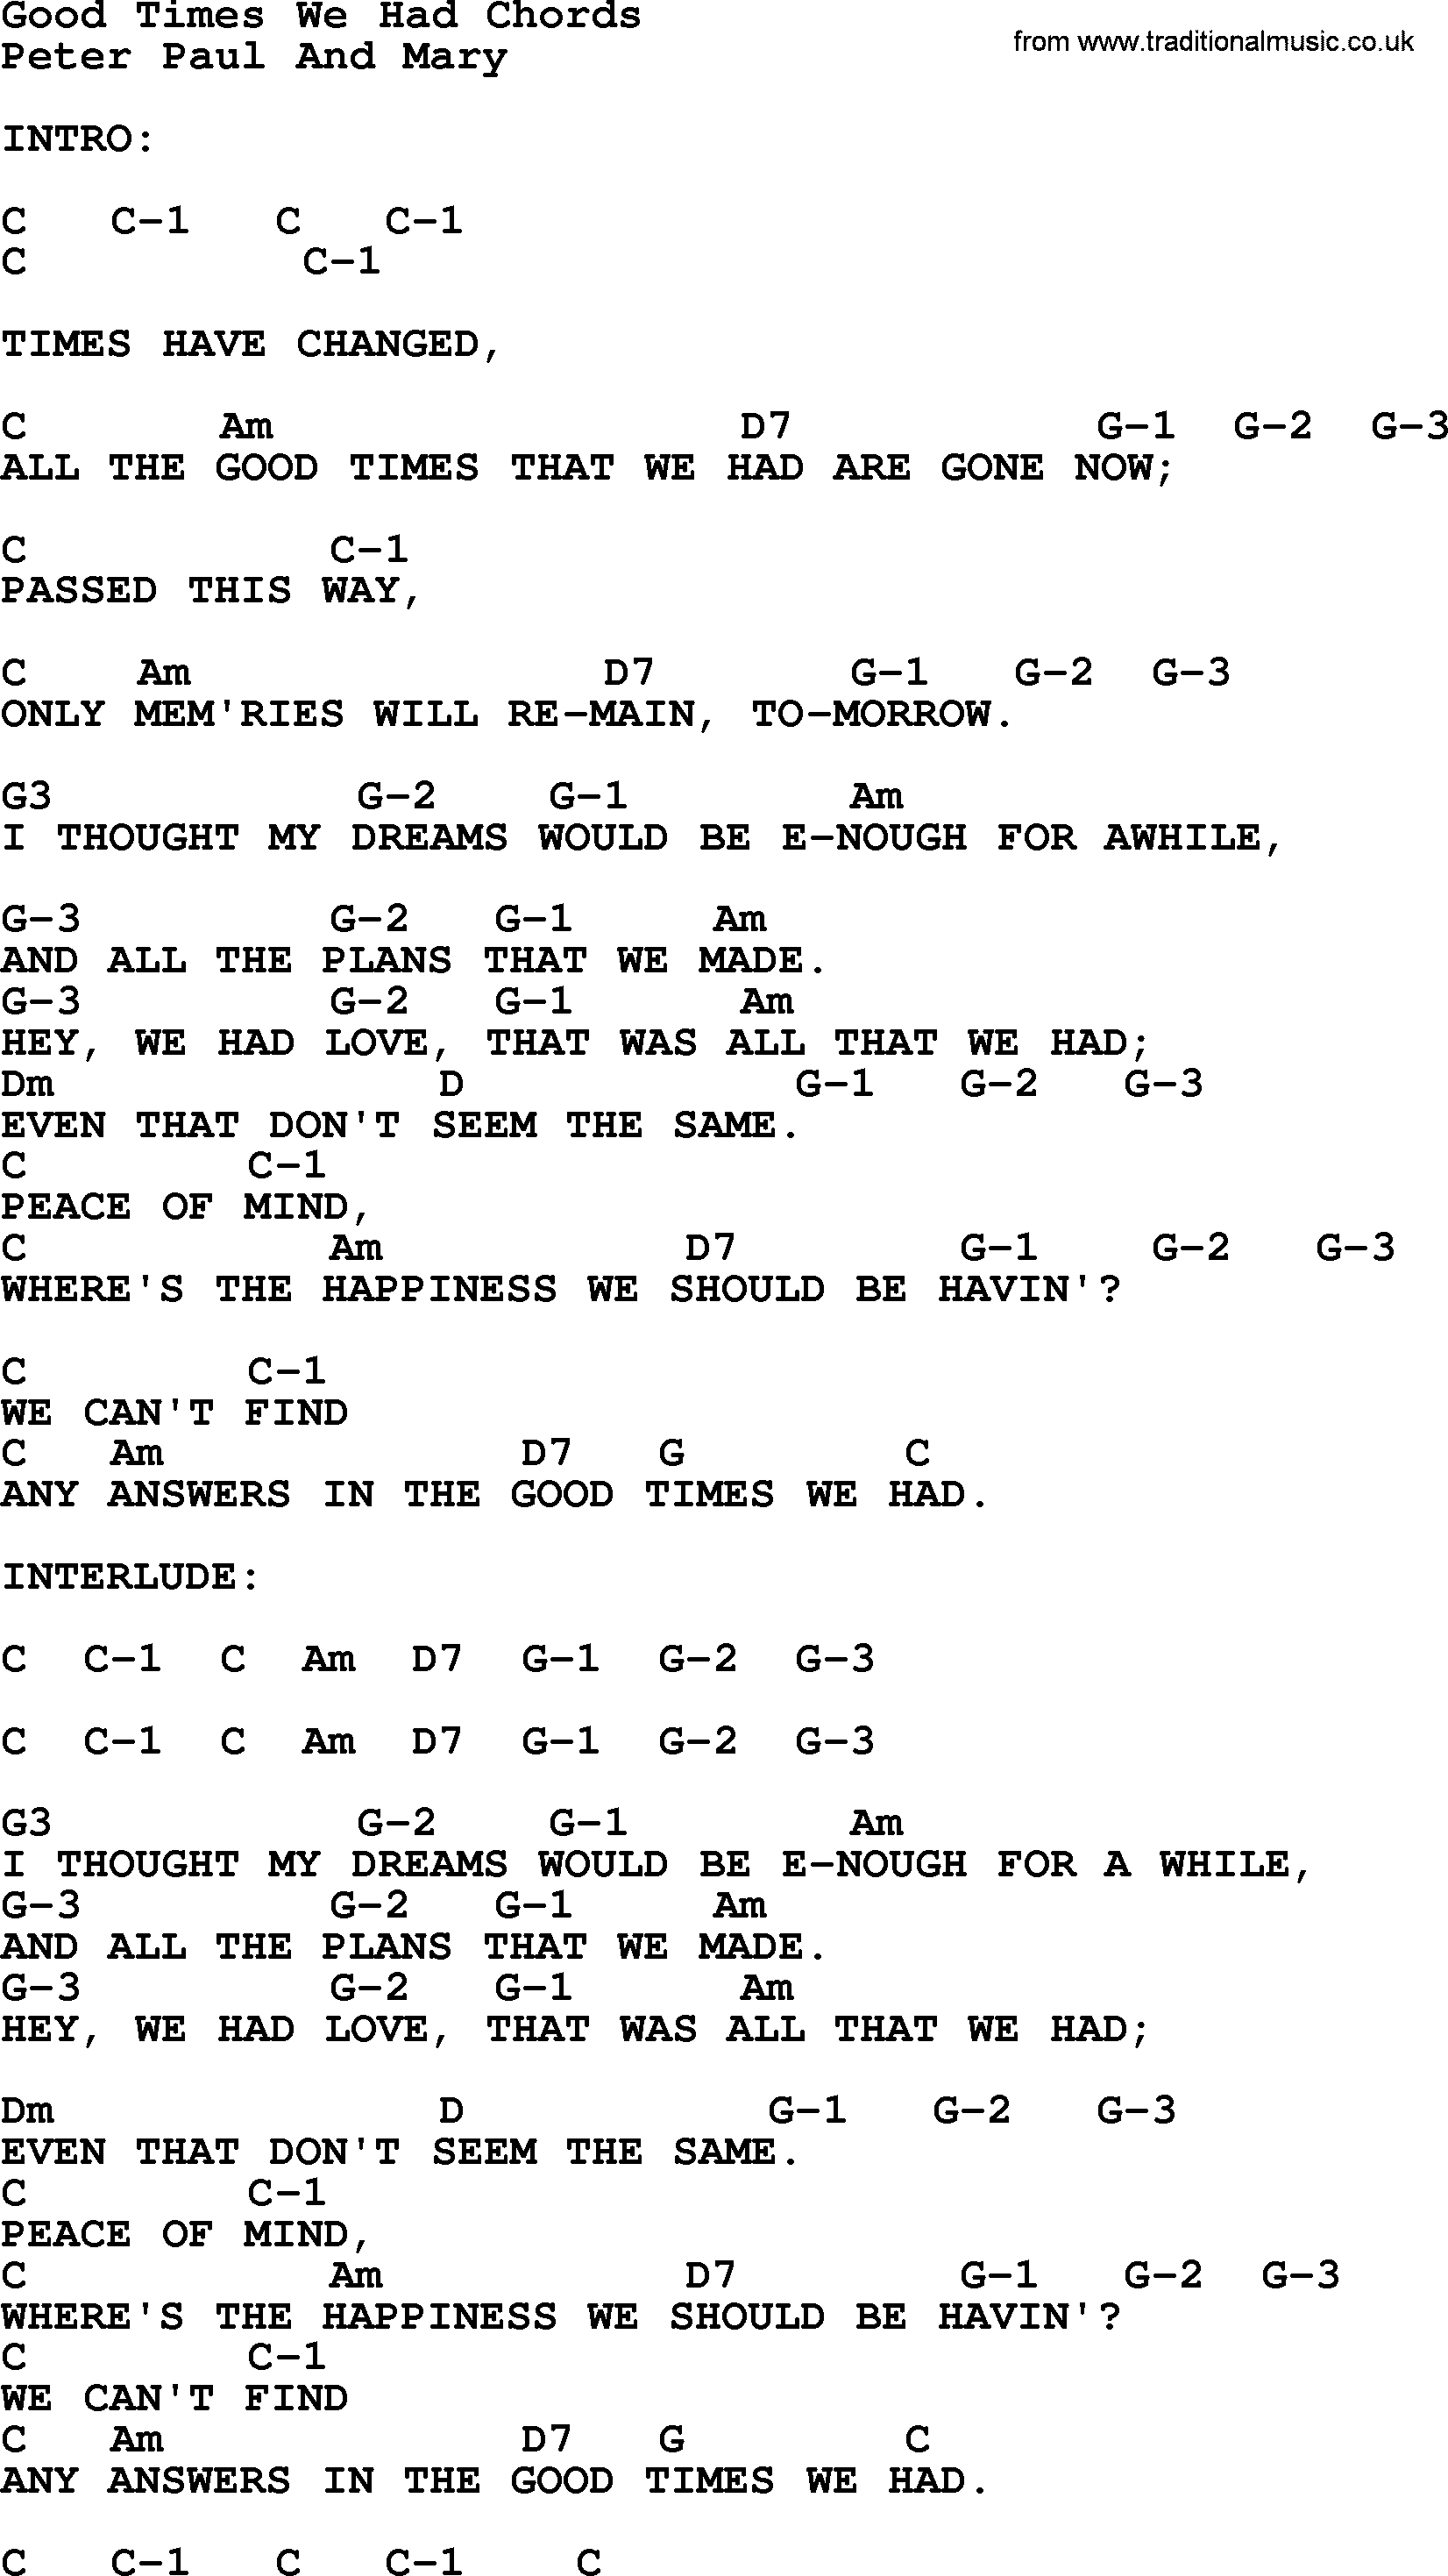 Peter, Paul and Mary song Good Times We Had, lyrics and chords